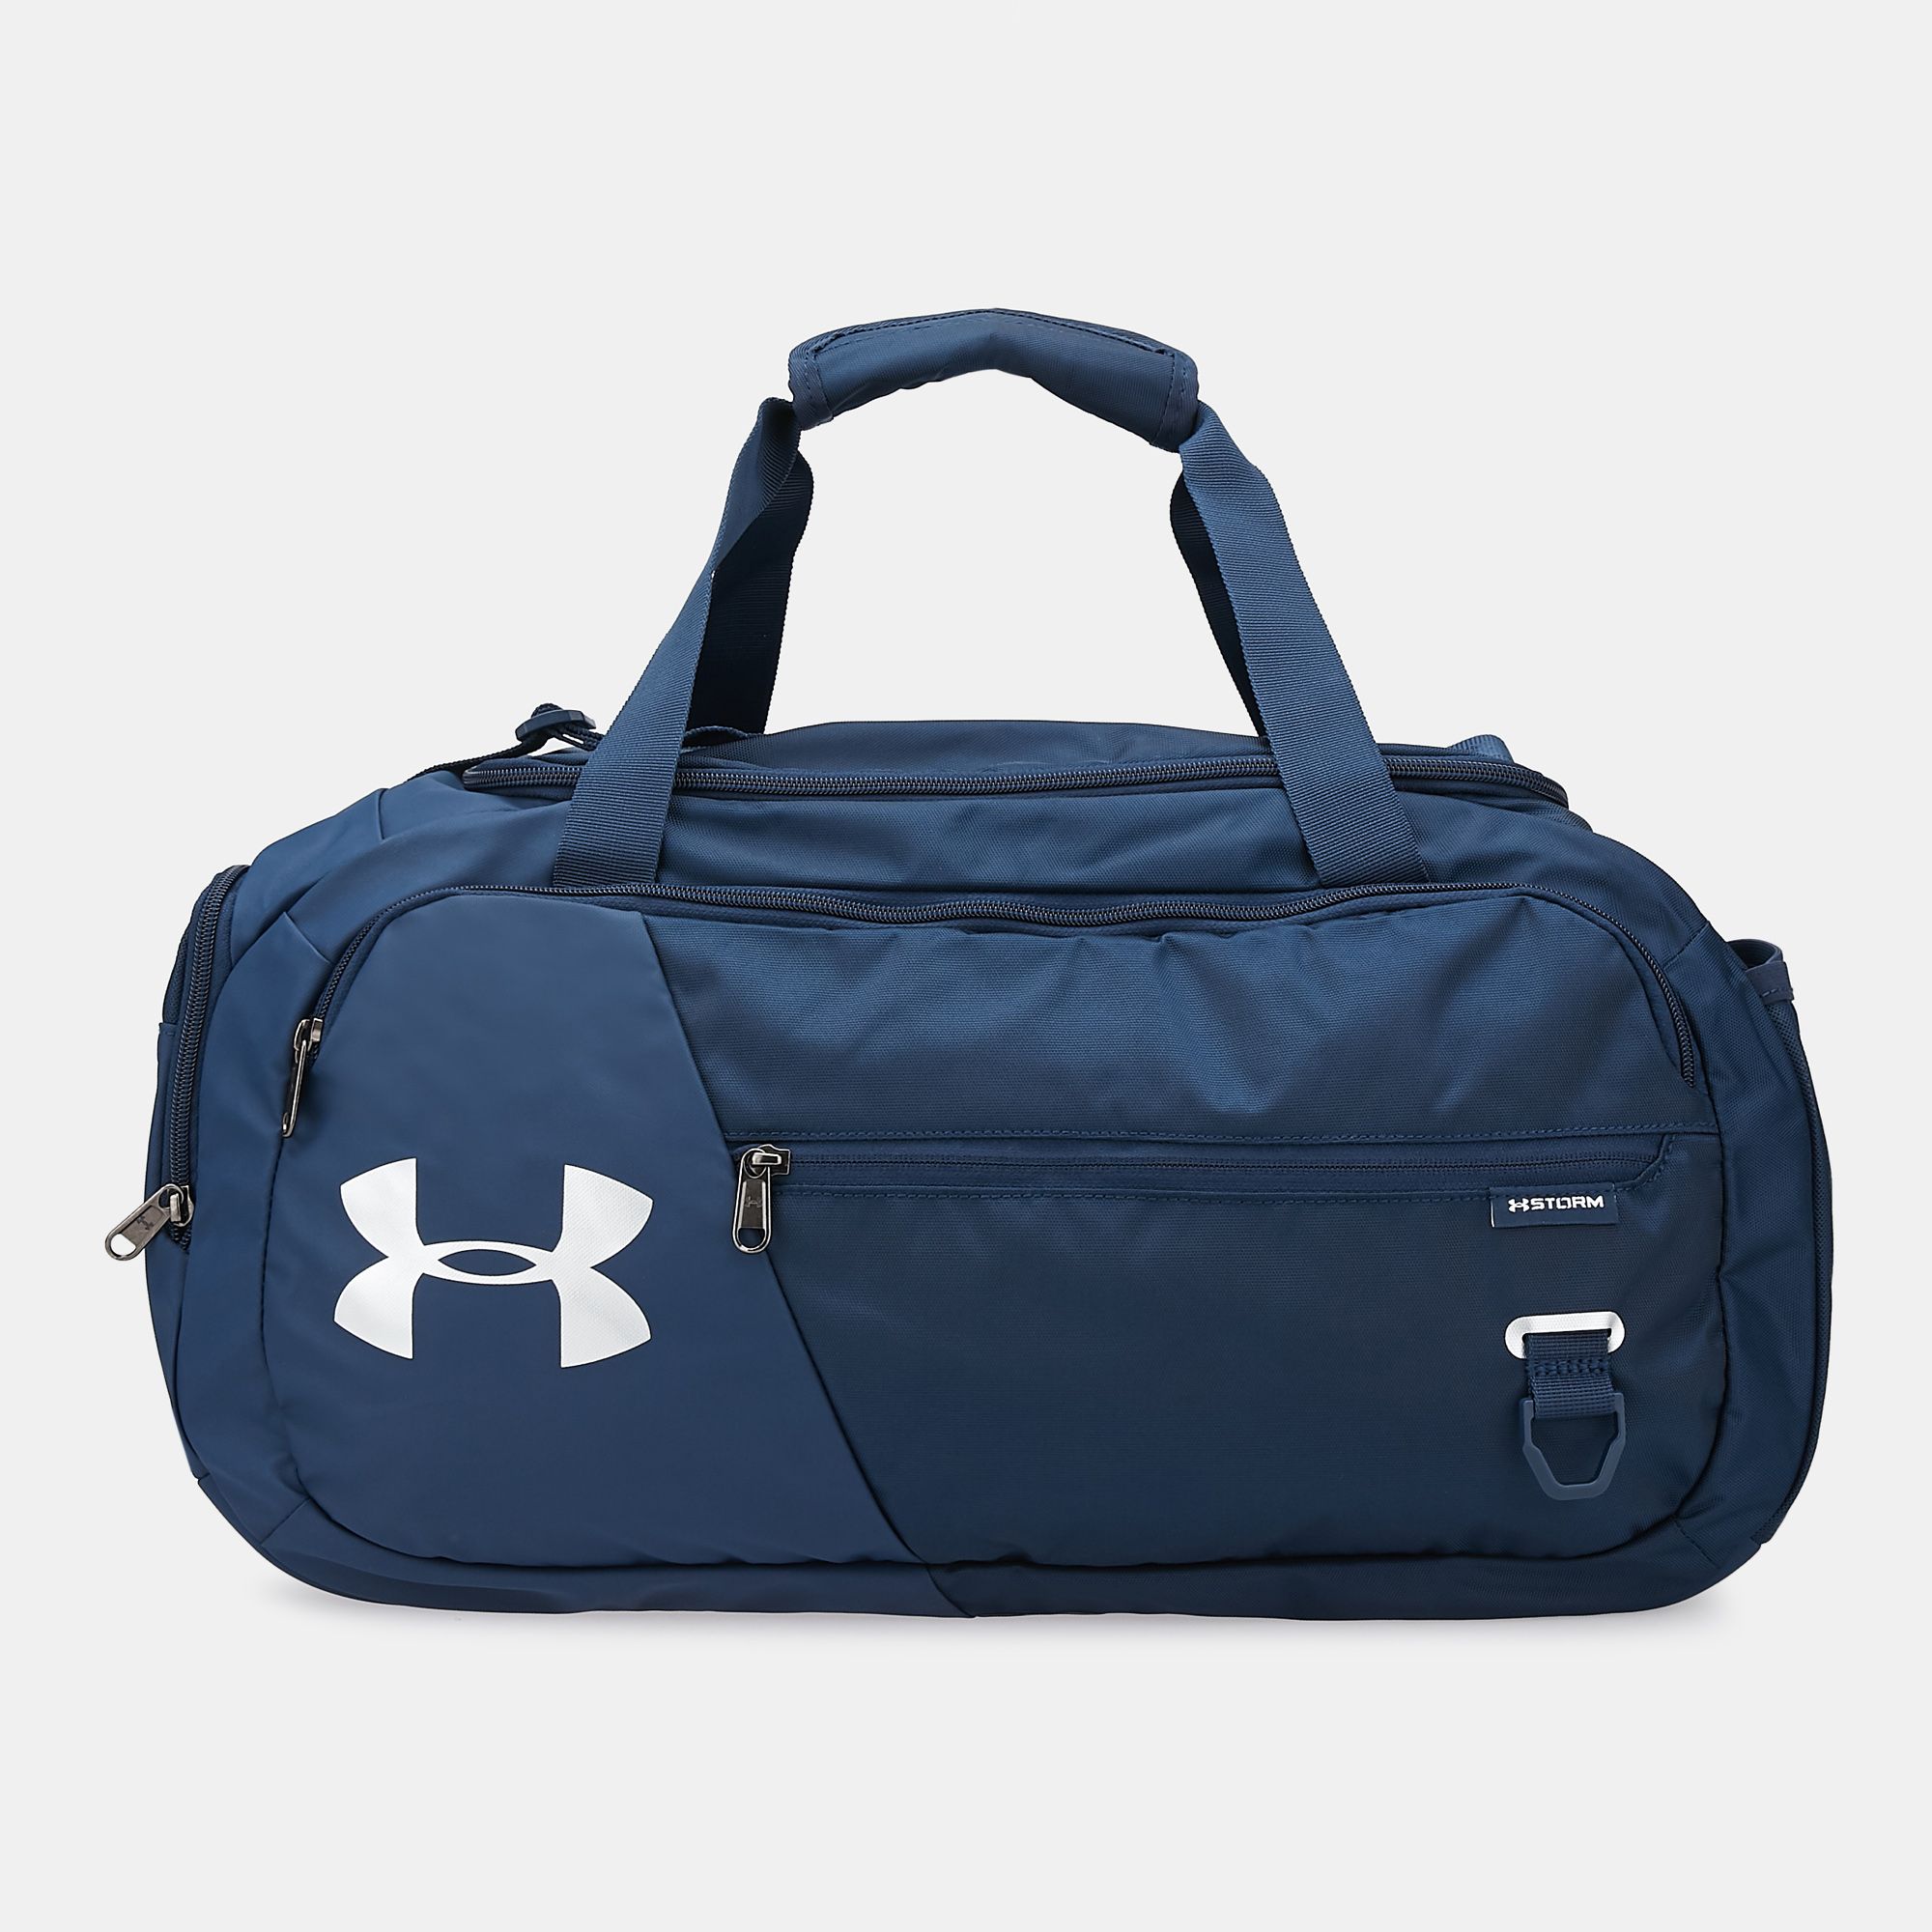 Under Armour Undeniable 4.0 Duffel Bag | Duffel Bags | Bags & Luggages ...